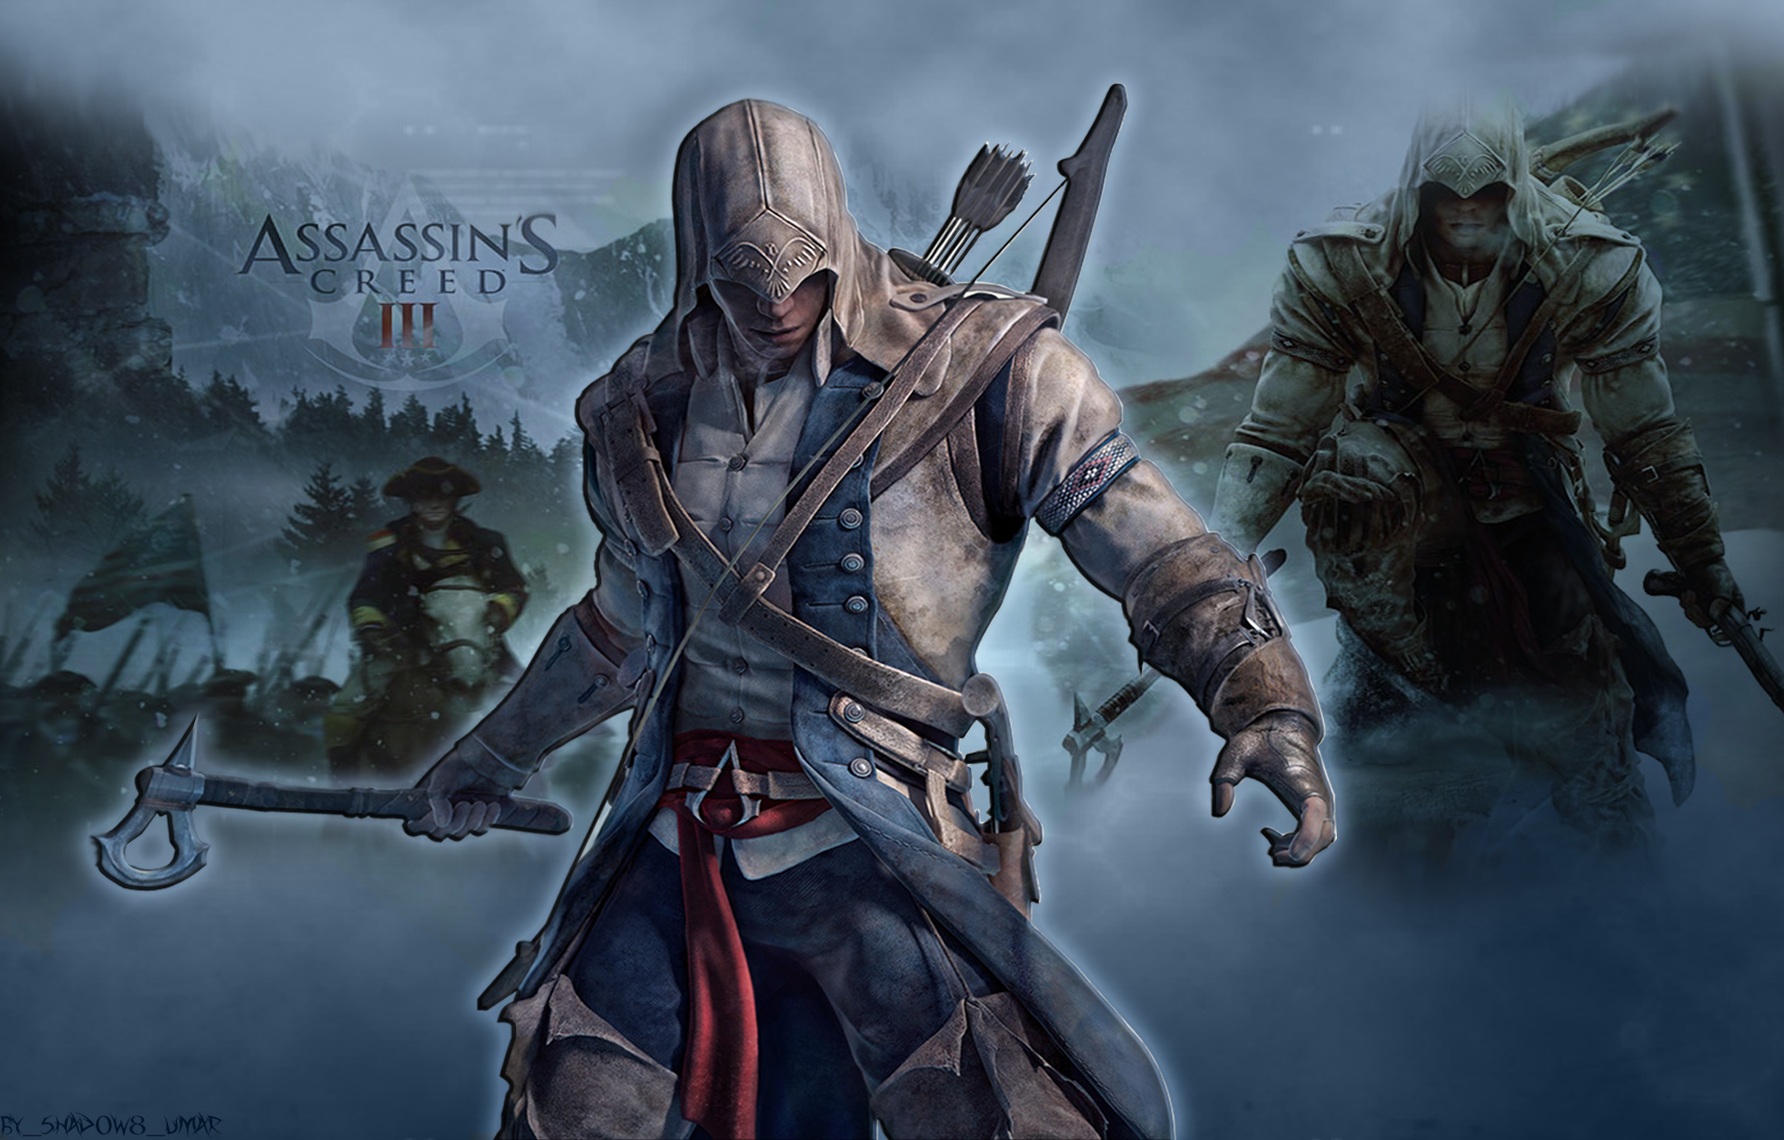 video game, assassin's creed iii, assassin's creed, connor (assassin's creed)